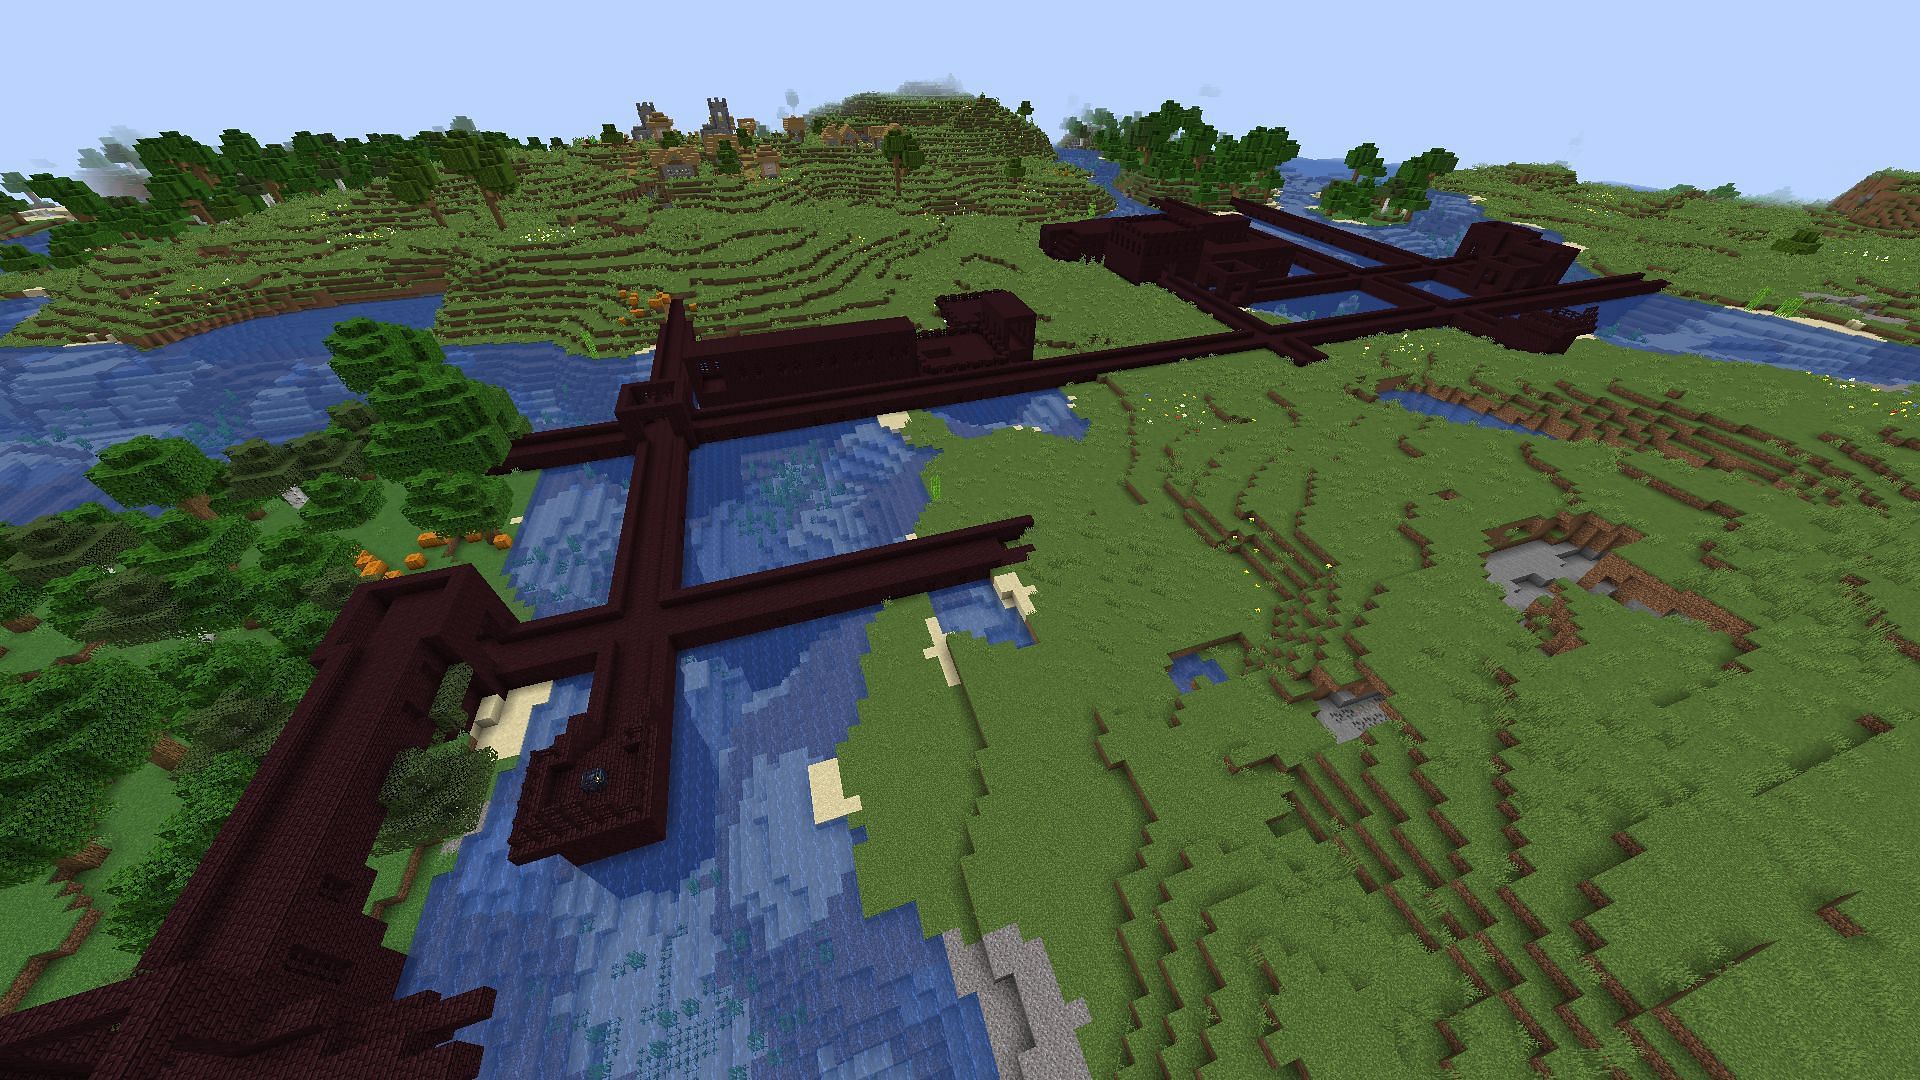 Nether fortress placed in the overworld with the use of commands (Image via Mojang)